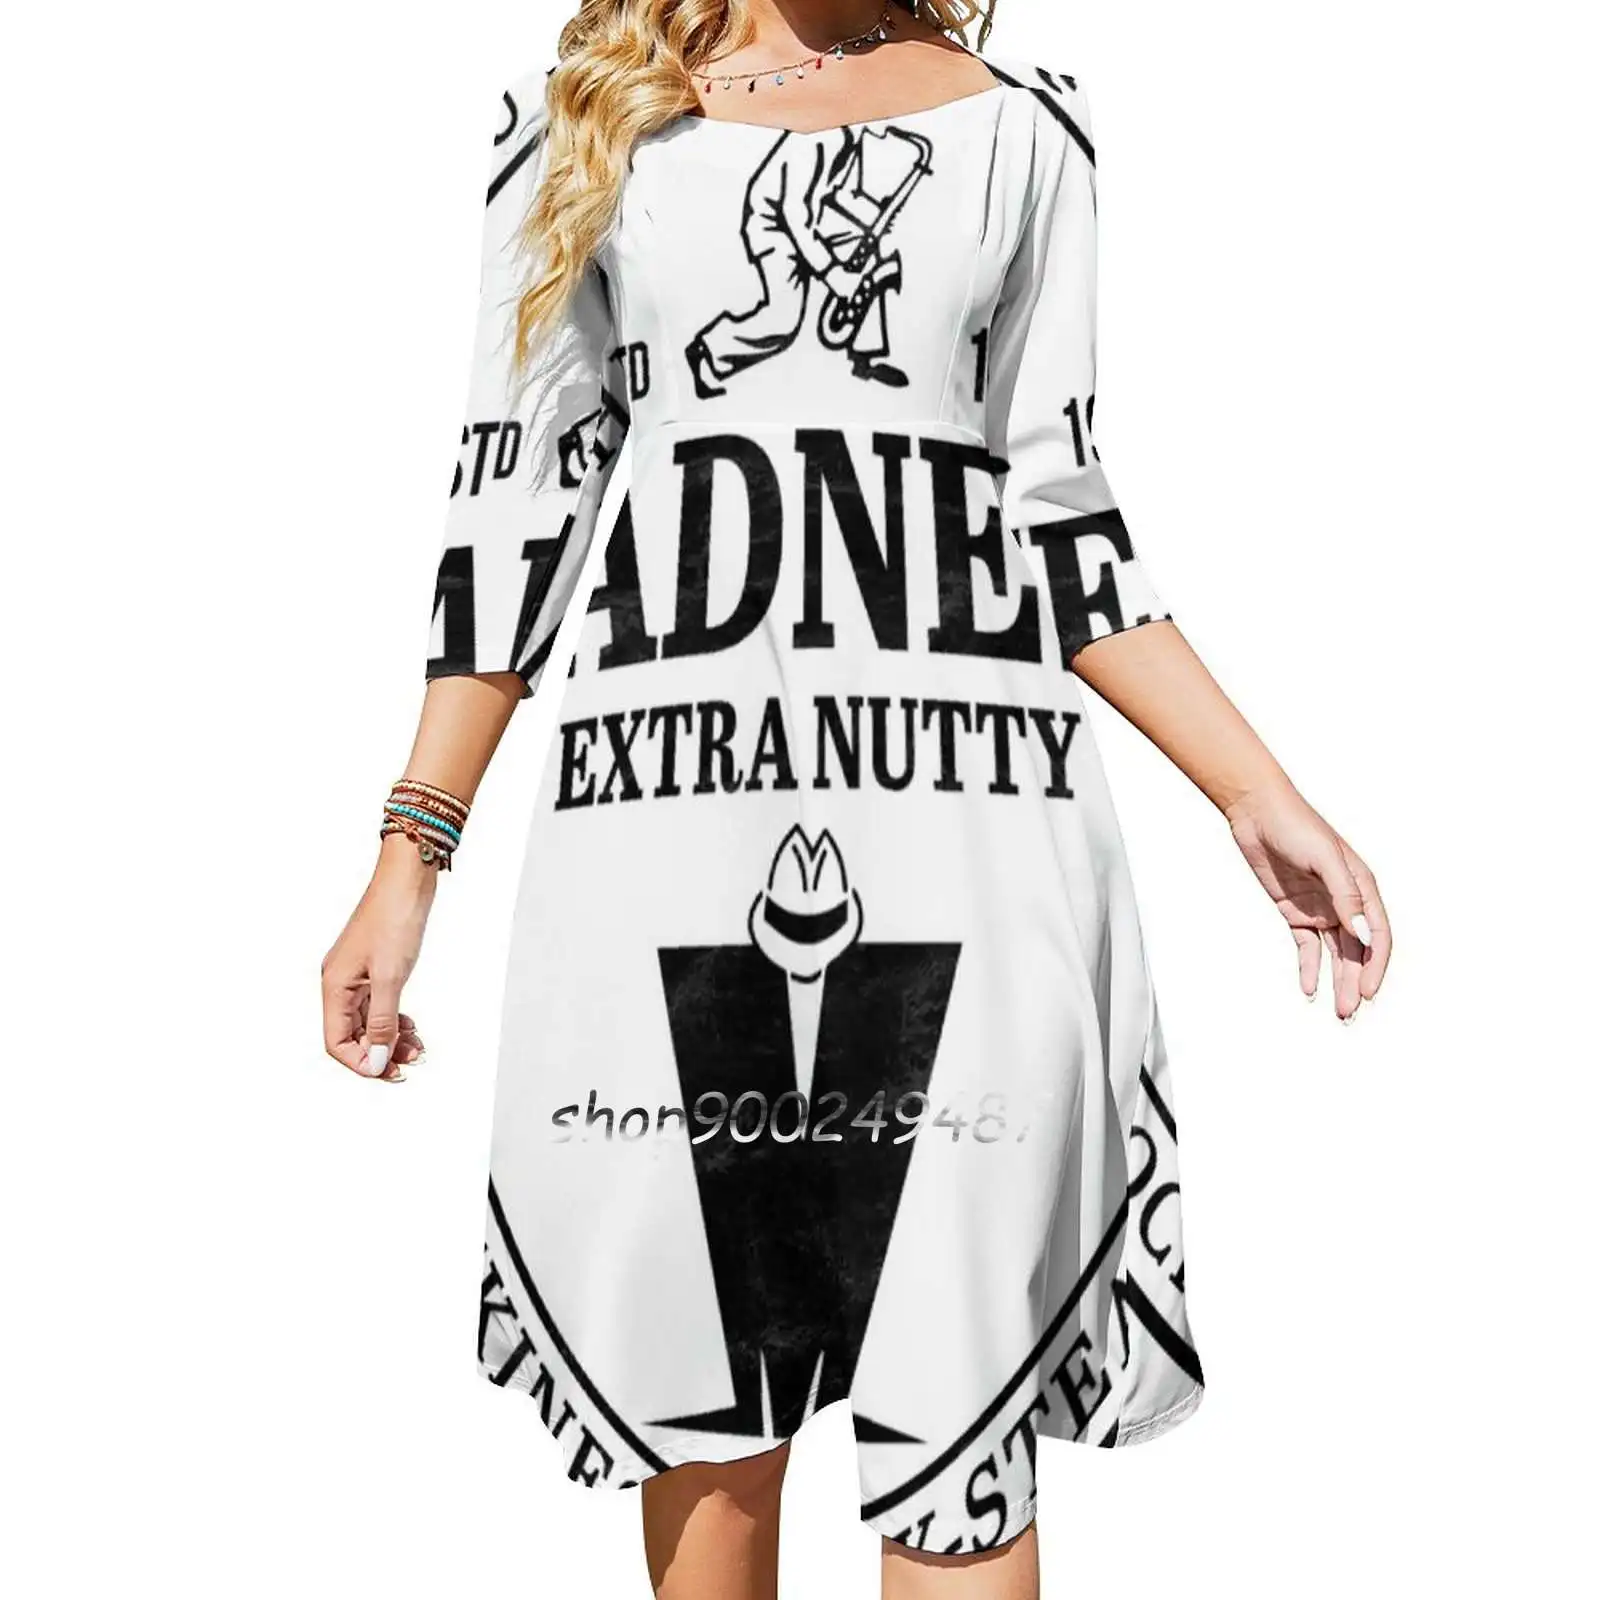 Madness Extra Nutty Evening Party Dresses Midi Sexy Dress Female Sweet One Piece Dress Korean Lambretta Scooter Scooterist